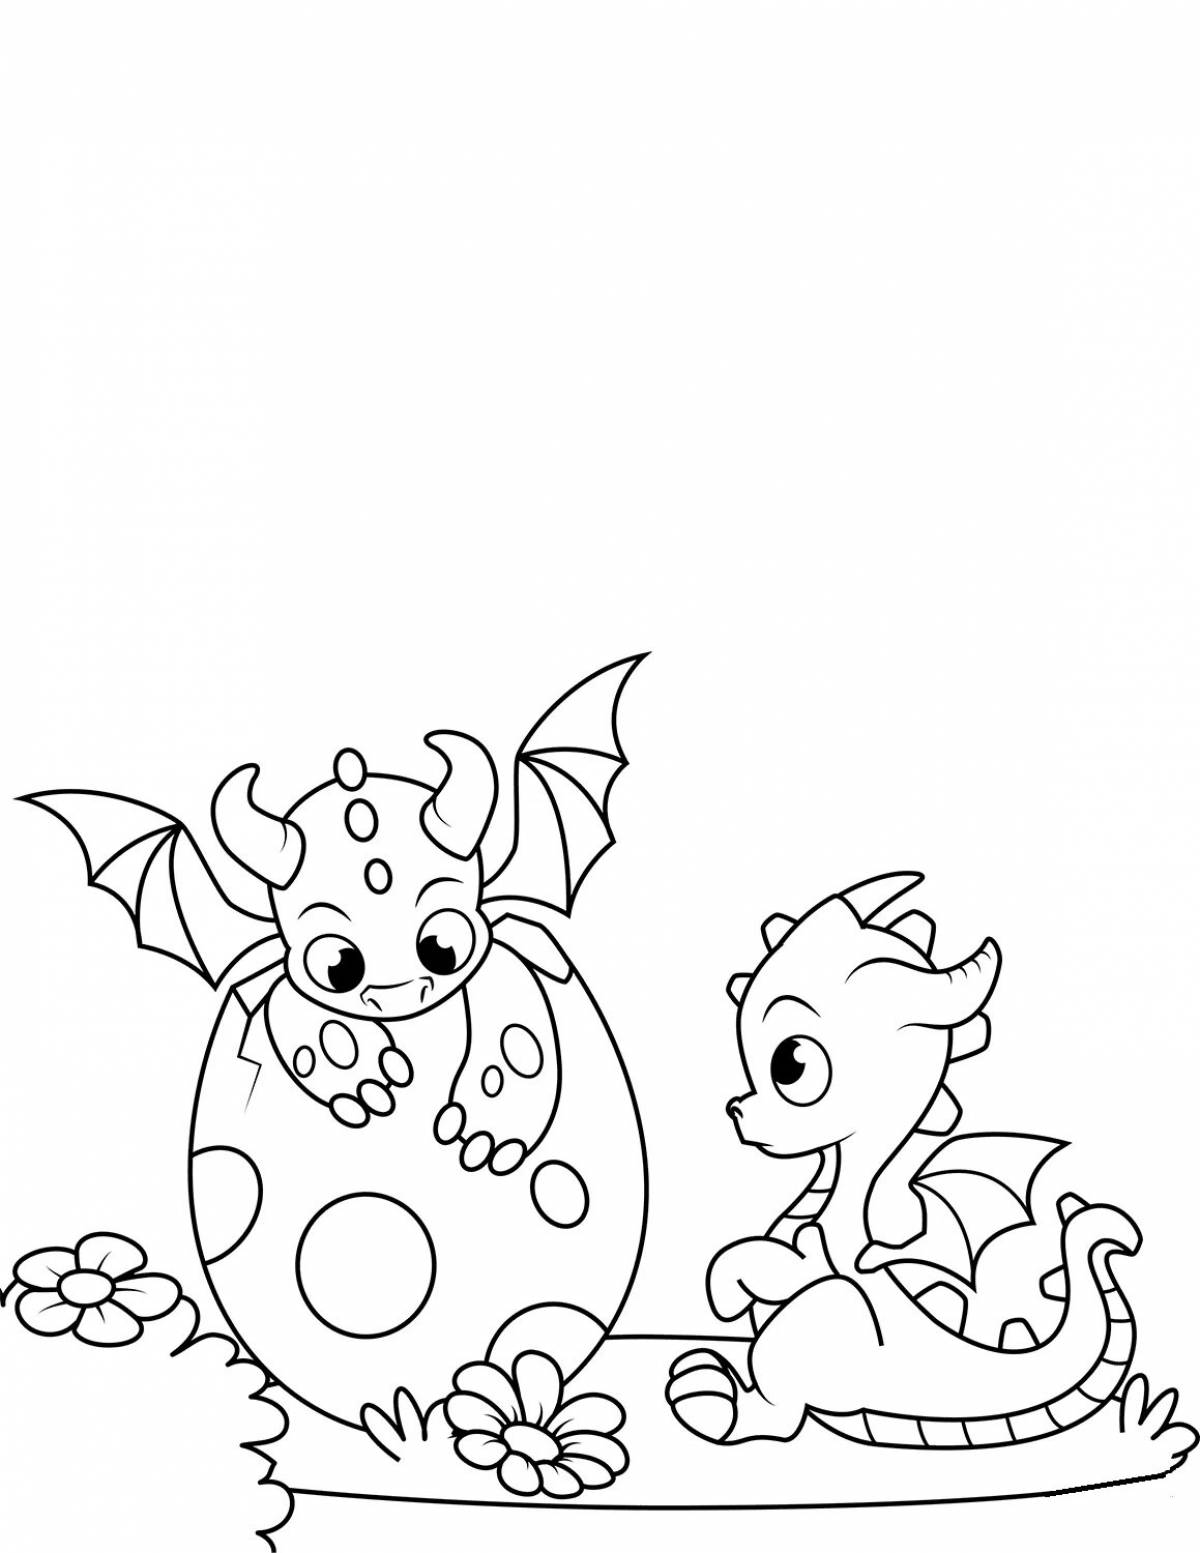 Exciting dragon coloring book for kids